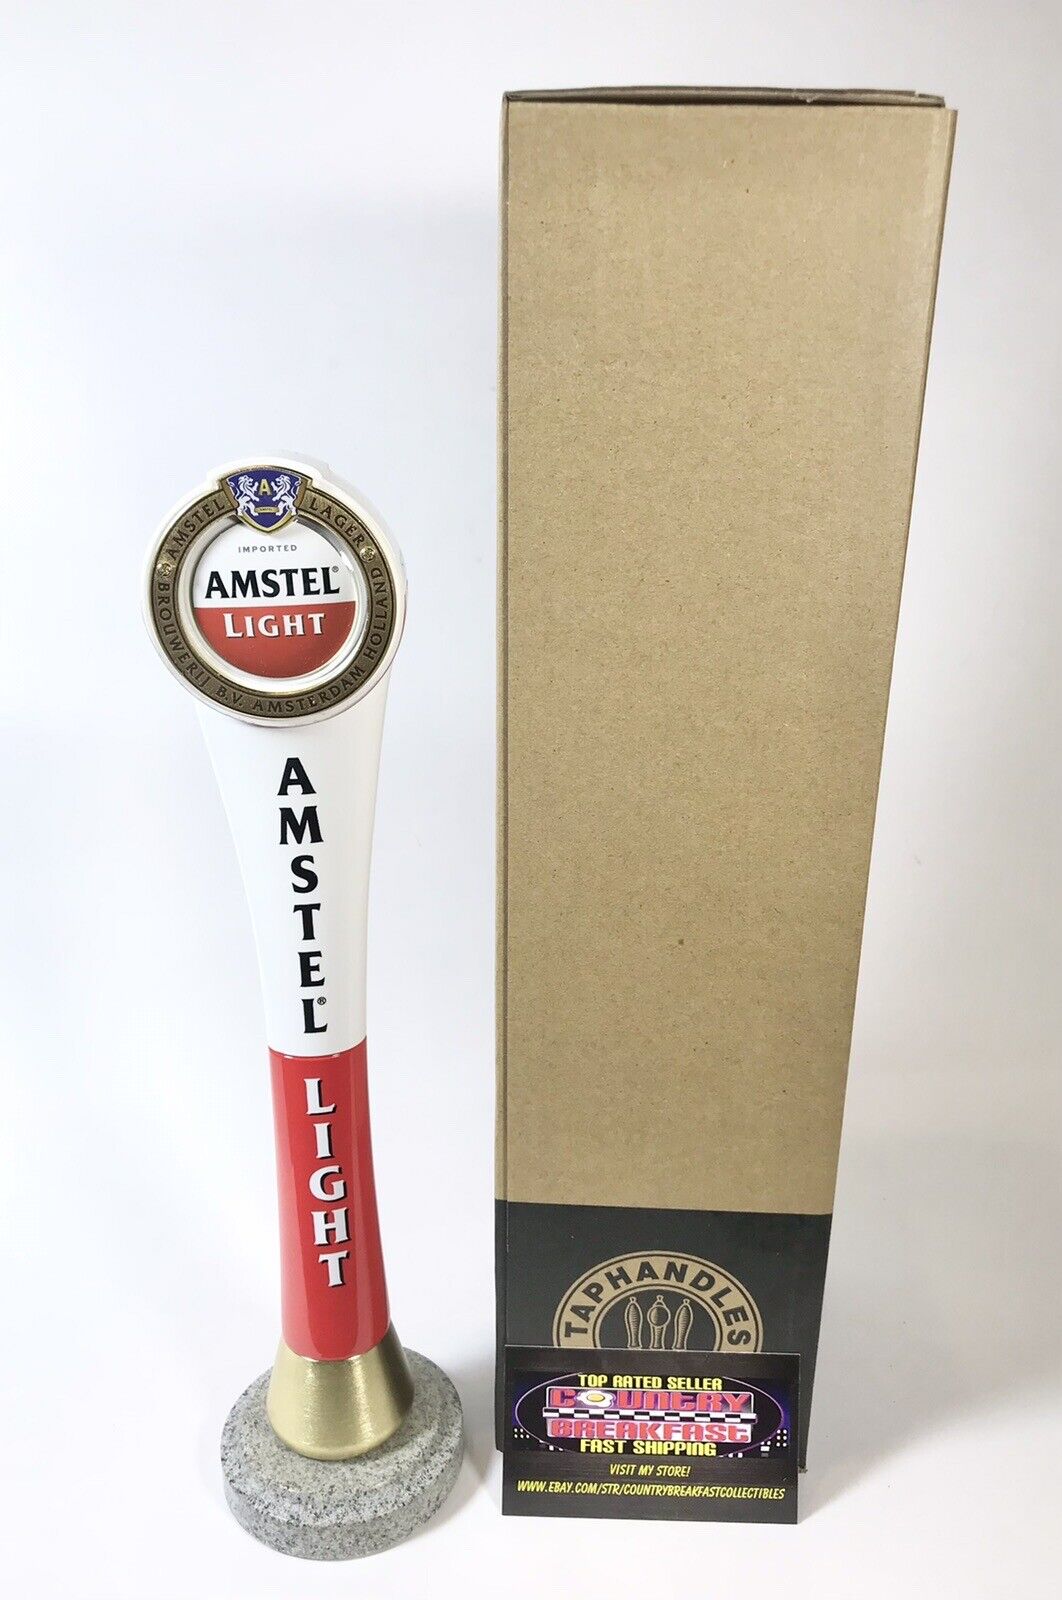 Amstel Light Lager Amsterdam Logo Beer Tap Handle 11.5”Tall - Brand New In Box